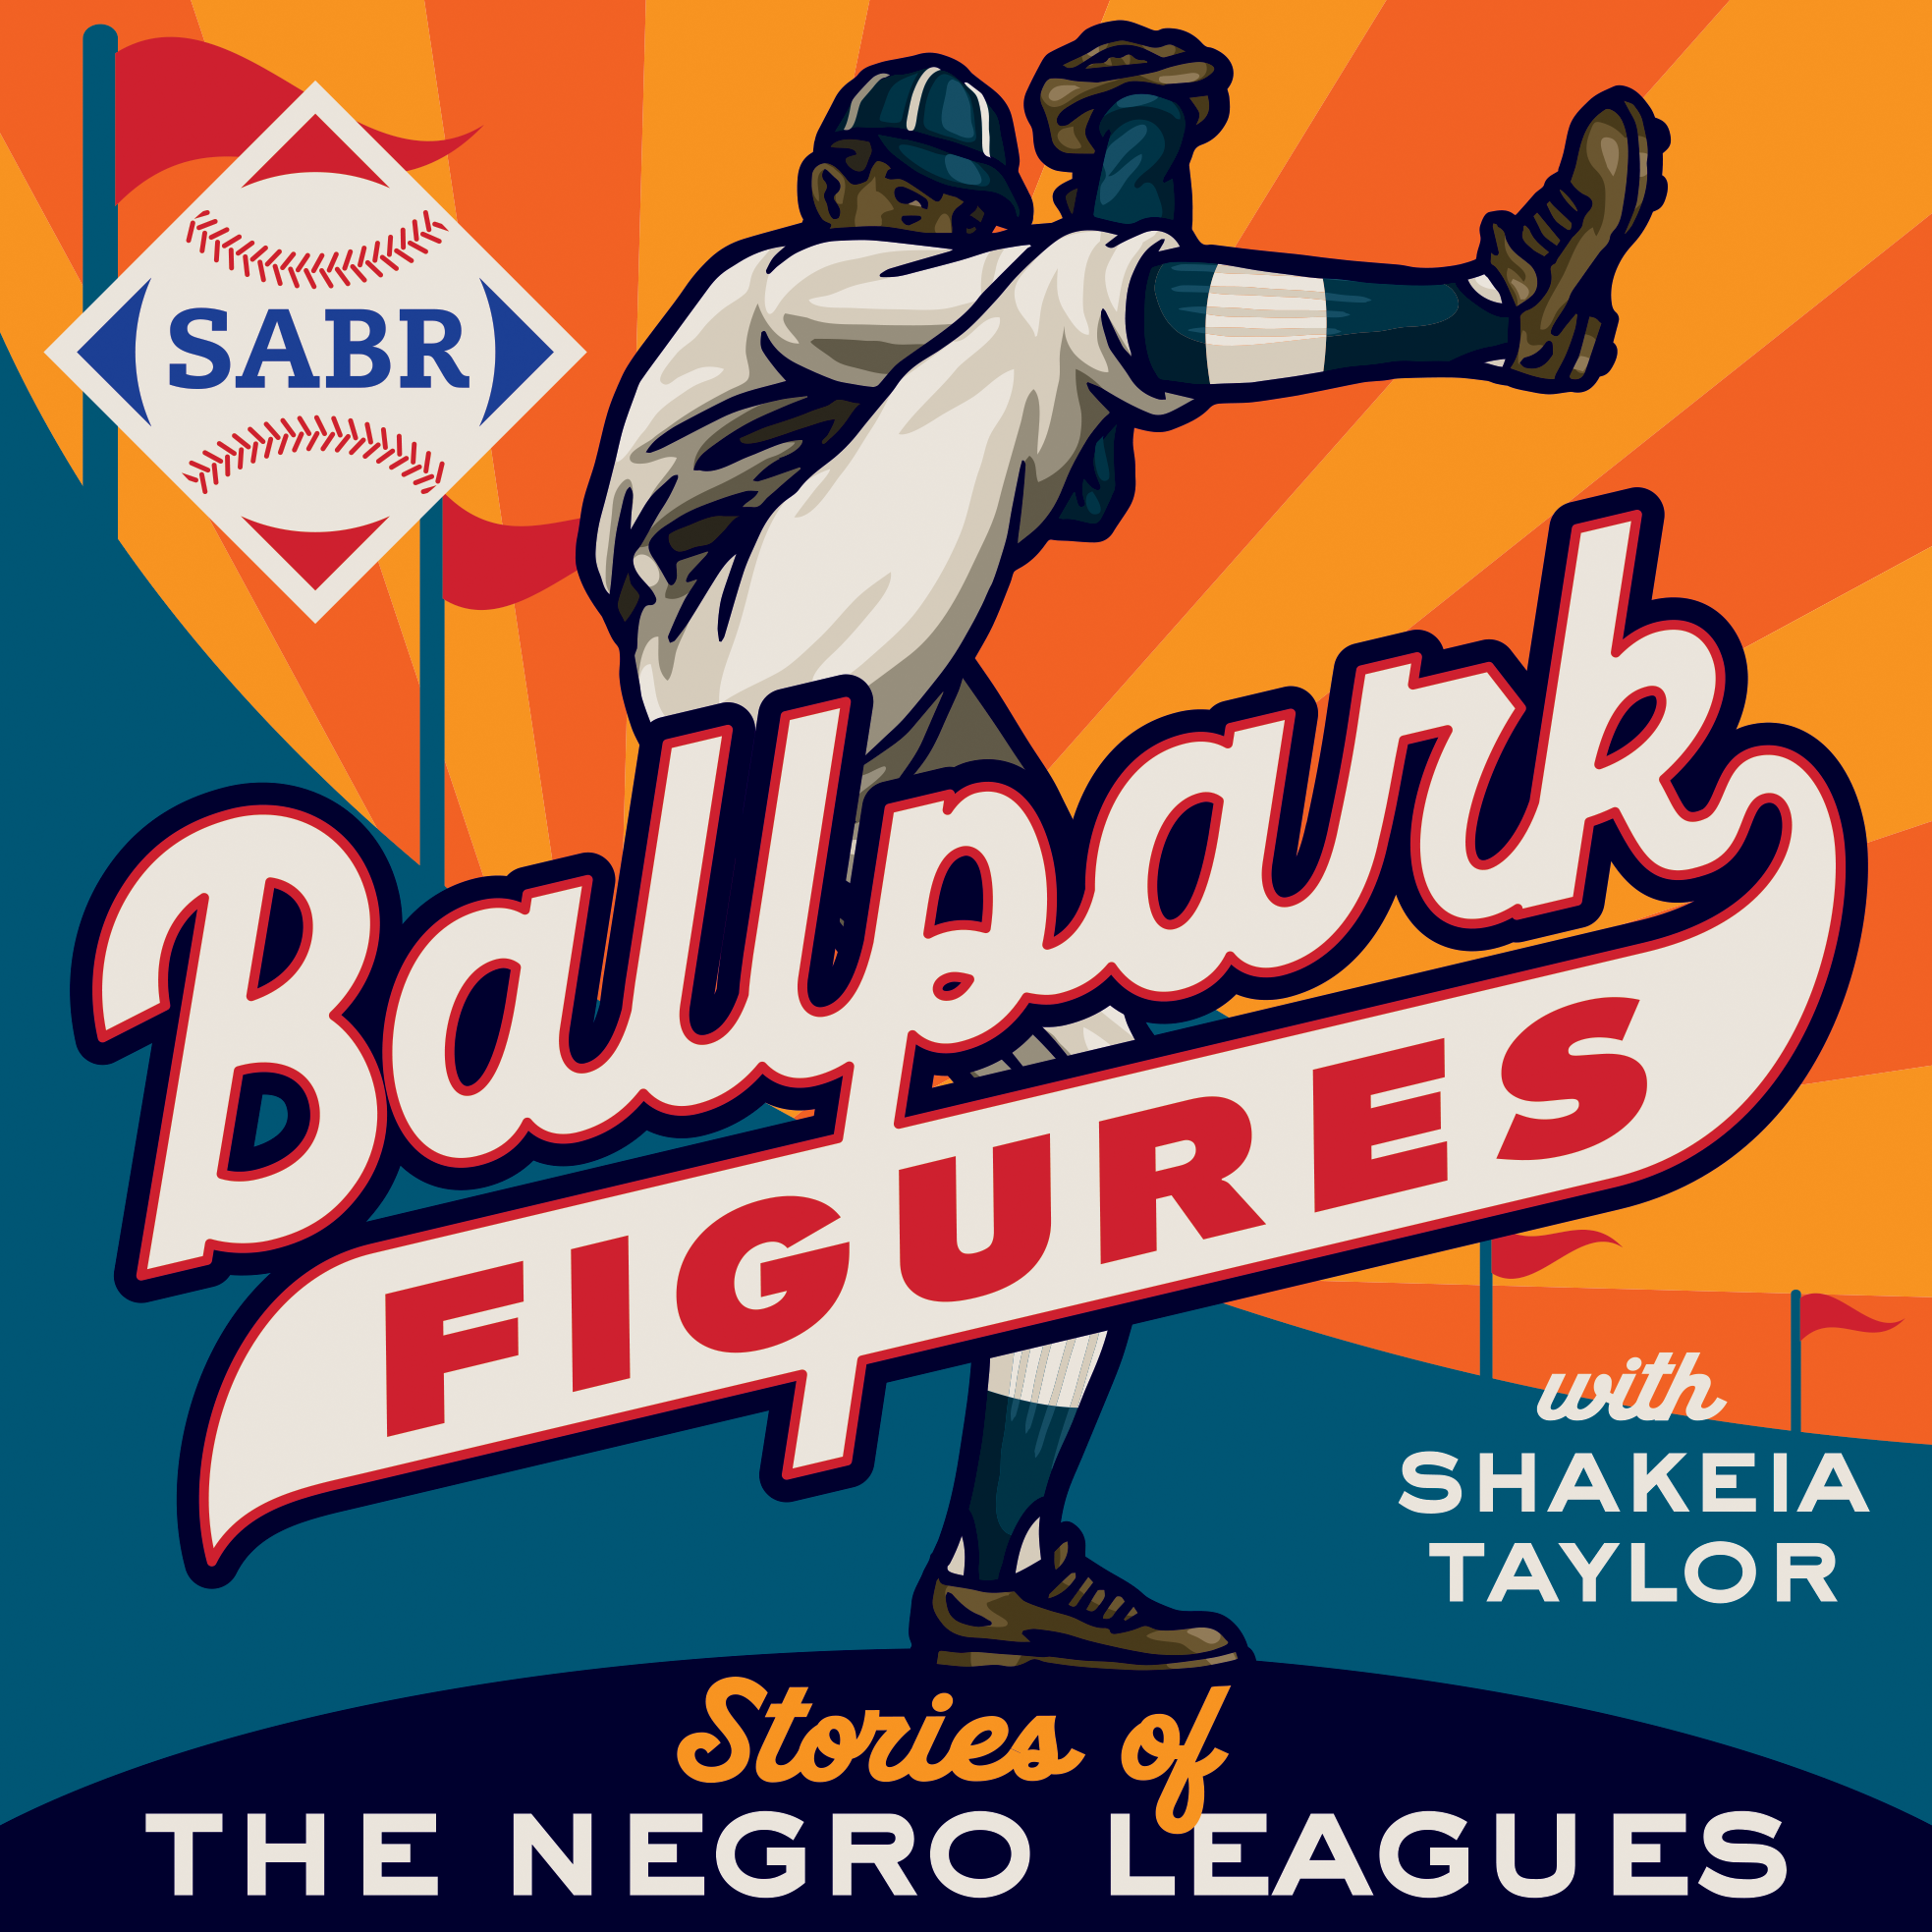 Ballpark Figures: Stories of the Negro Leagues, hosted by Shakeia Taylor